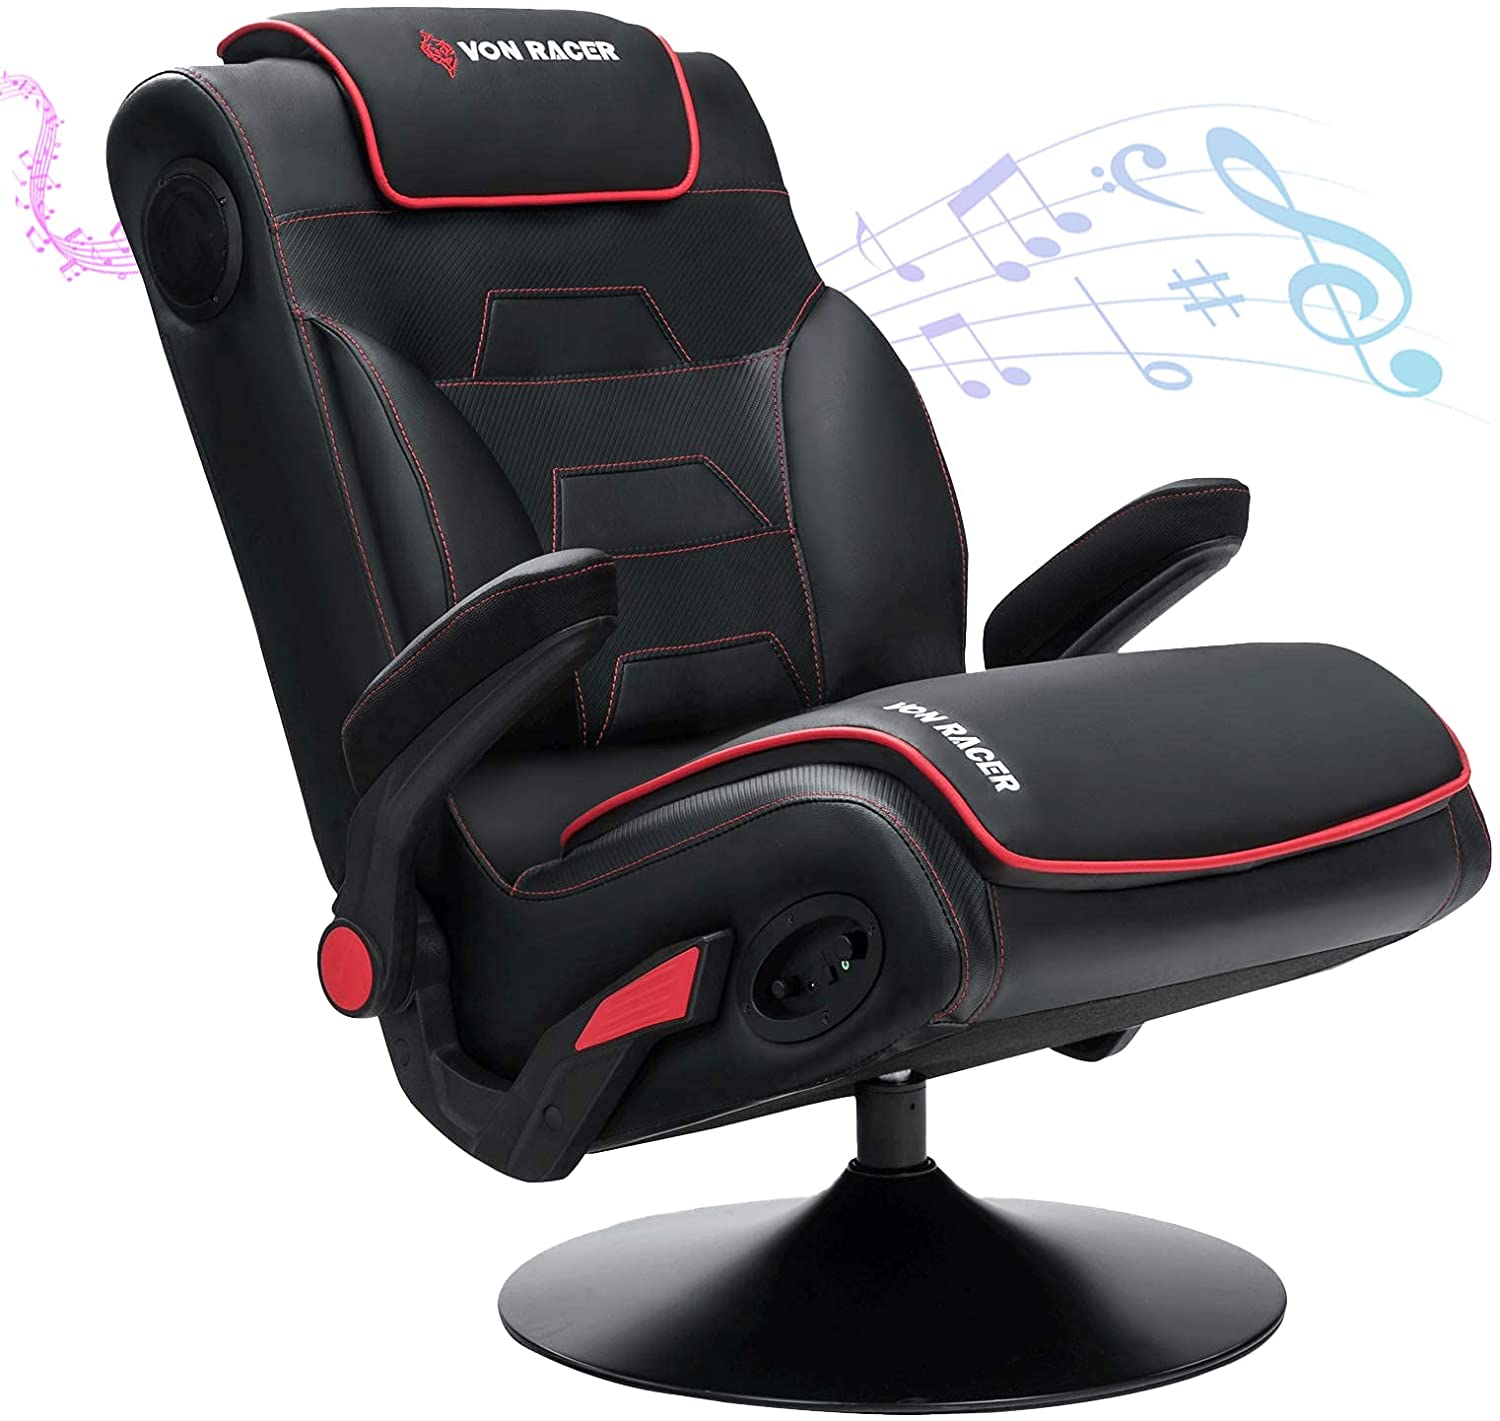 What You Should Know About Video Game Chairs 187144 1 - What You Should Know About Video Game Chairs